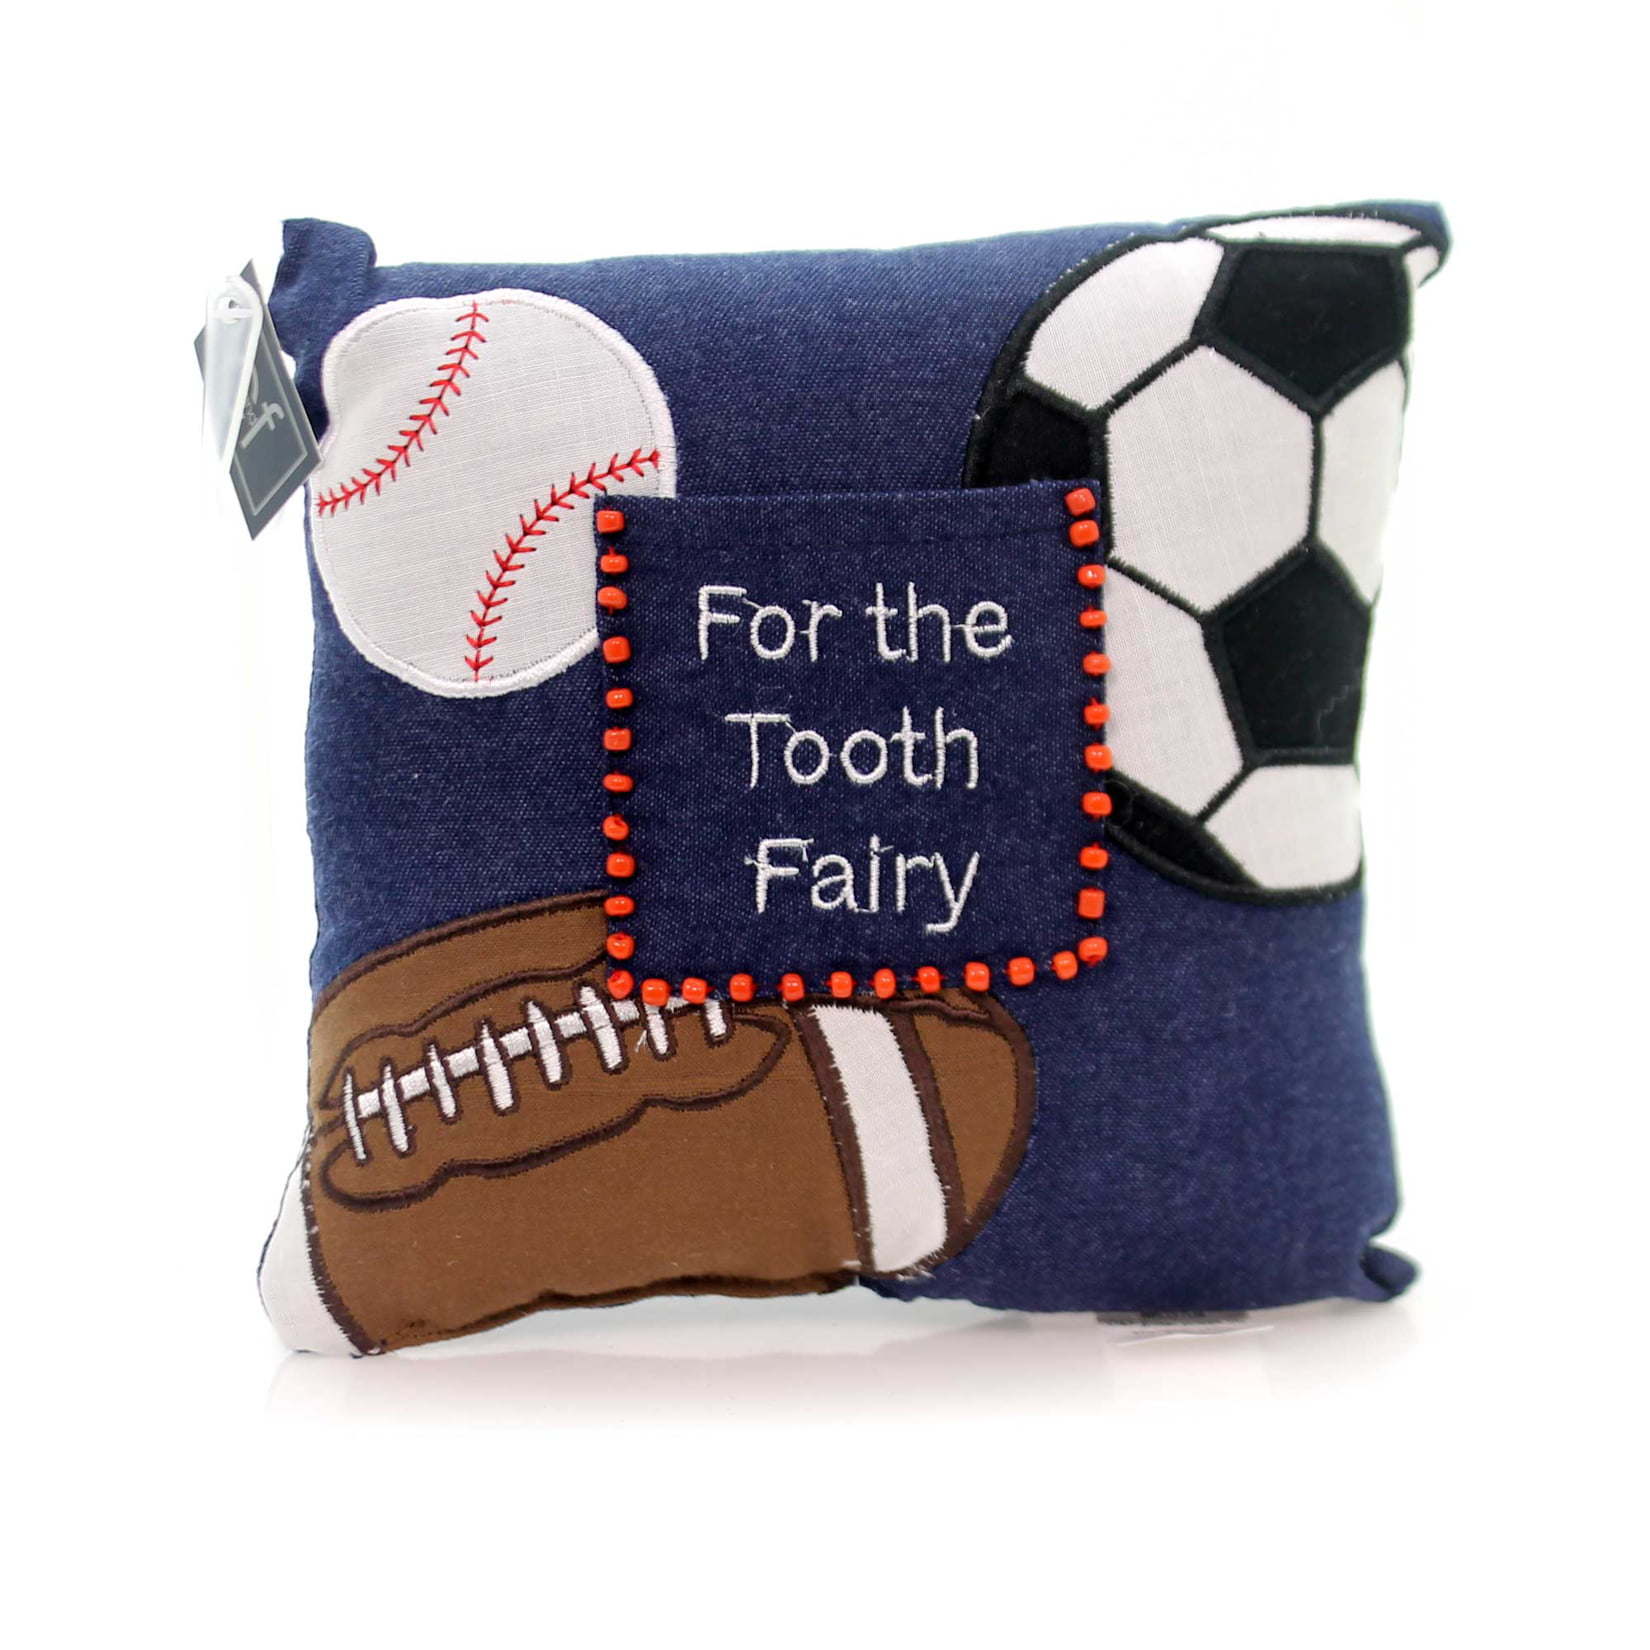 My Tooth Fairy C&F Home 6" x 6" Saying Pillow w/Pocket 